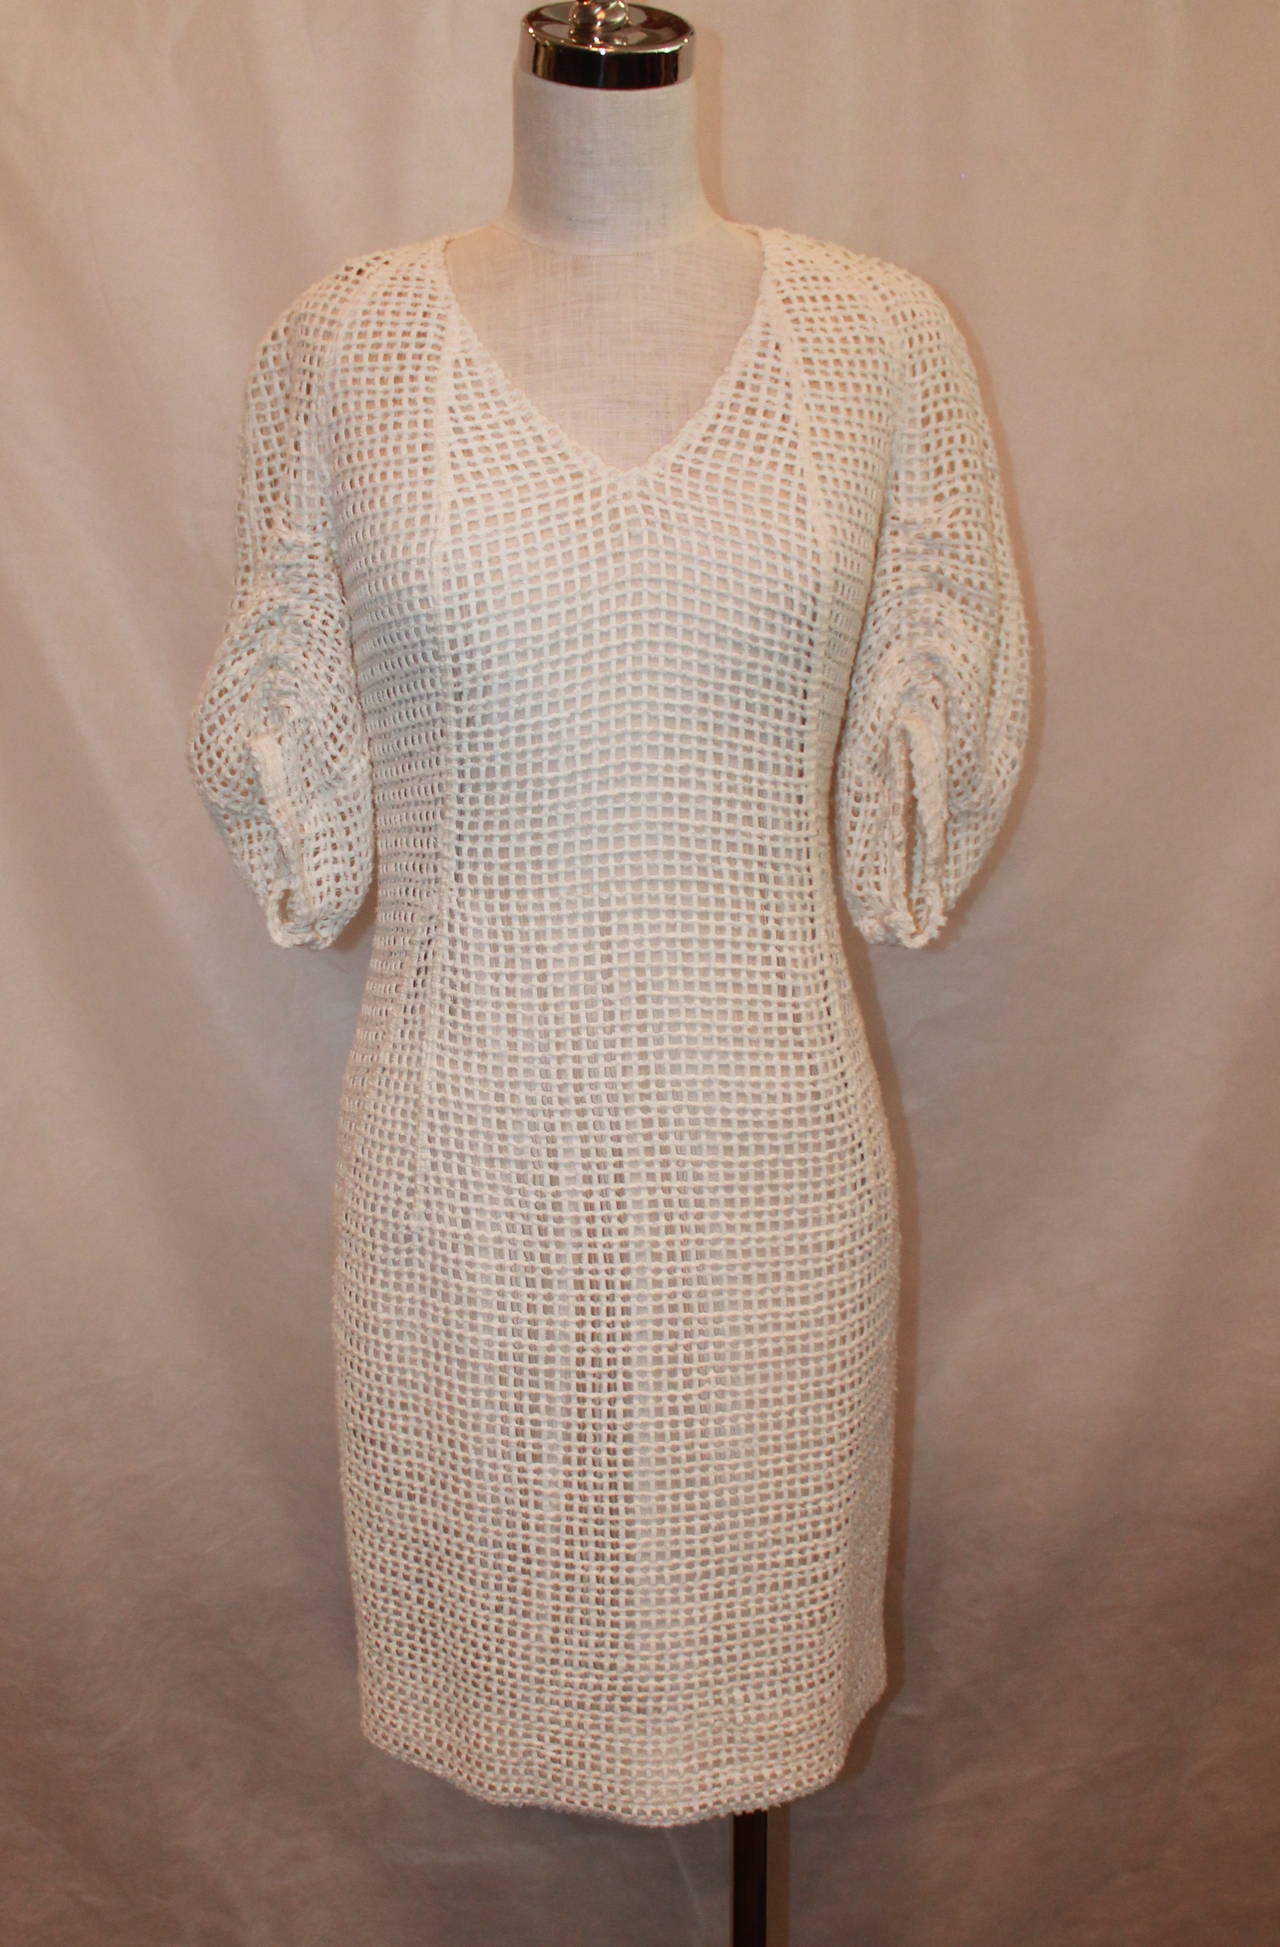 Akris Ivory Crochet Sleeve Dress NWT - 6 - rt $2,990. This dress is new with tags with no wear visible. It has bell sleeves and is slightly tapered to the body. 

Measurements:
Bust- 34